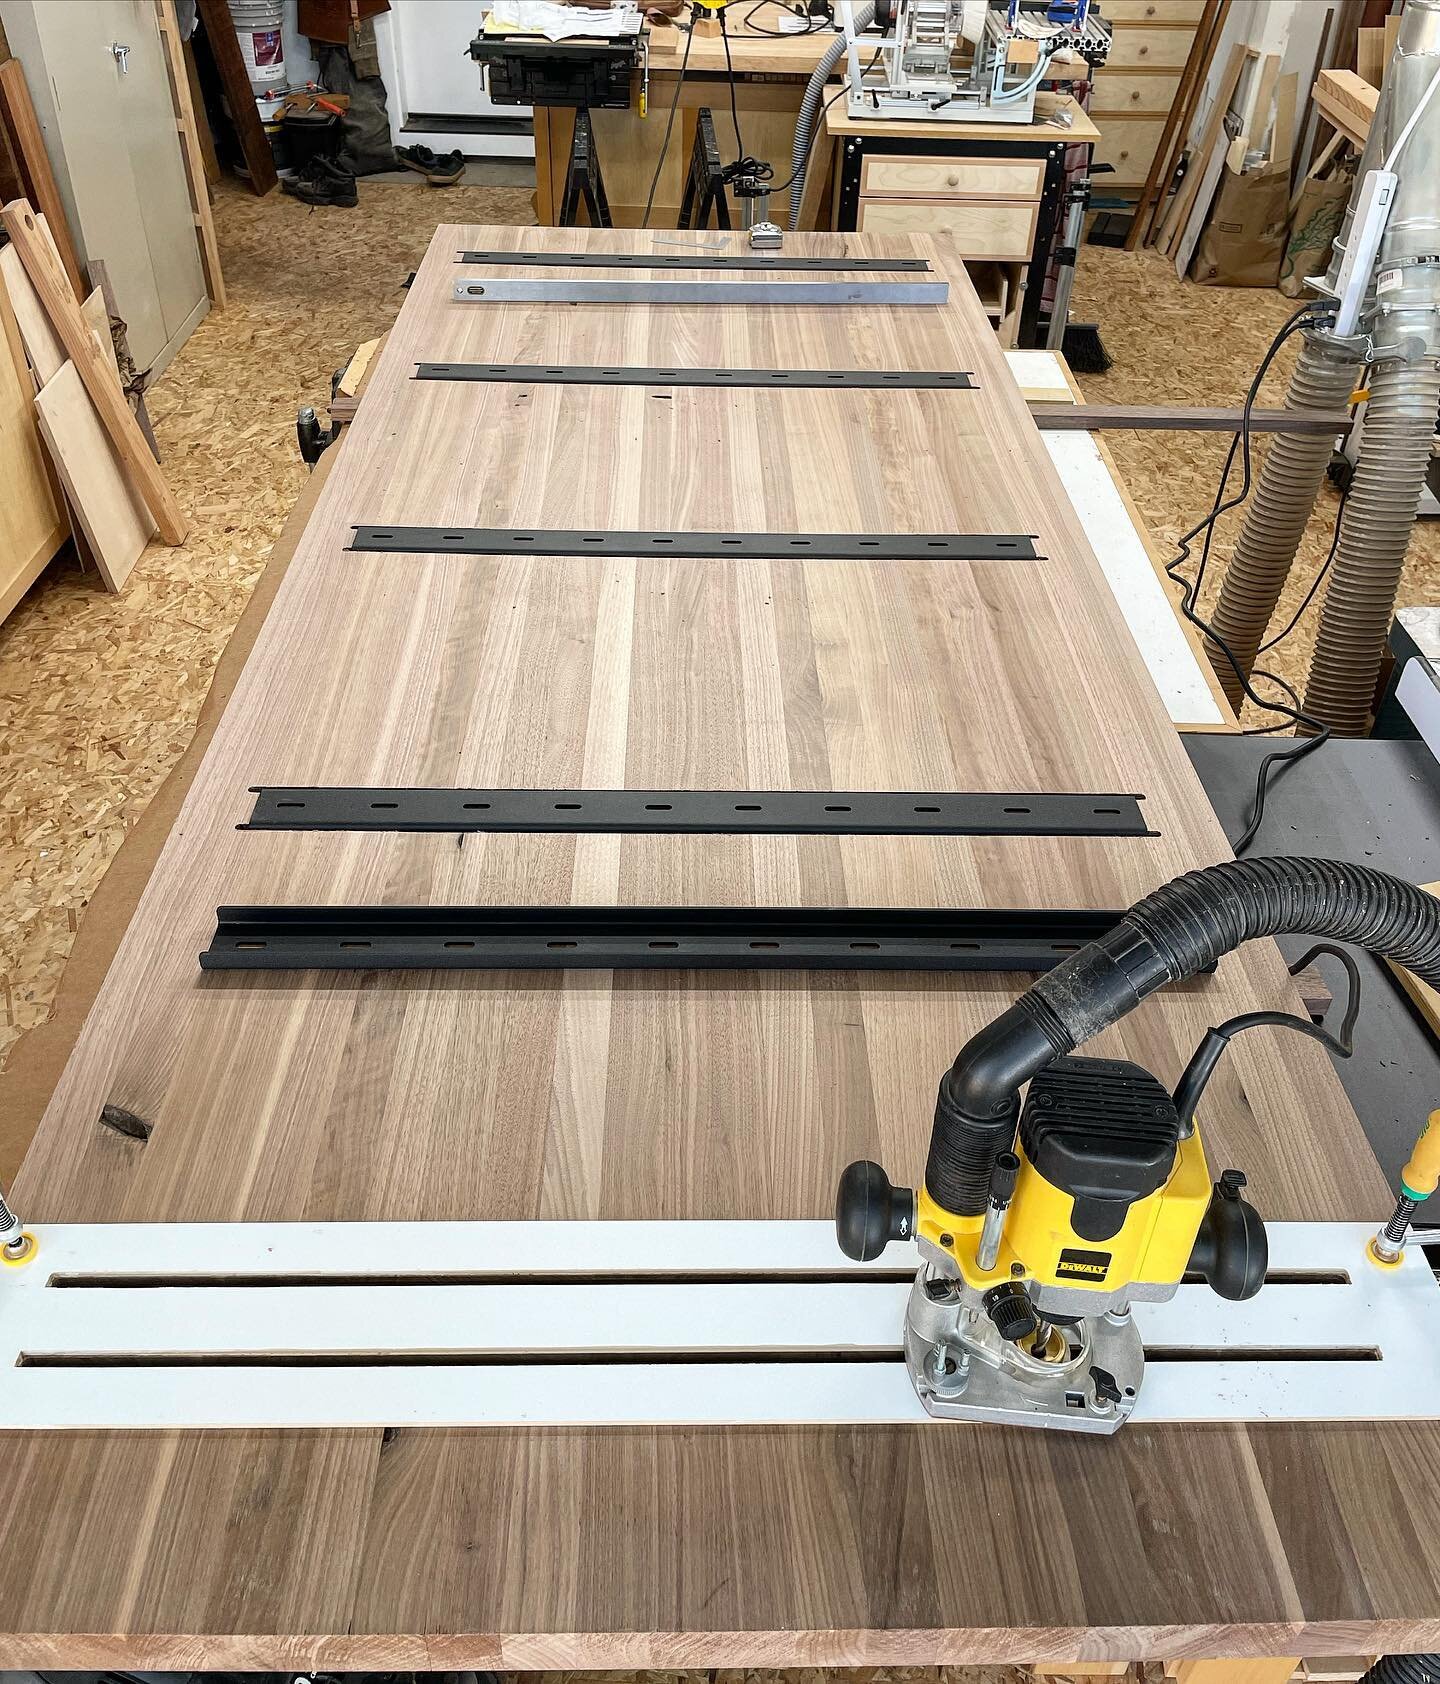 How about a massive 9ft, solid walnut island top for order? With full length, continuous straight grain staves, properly seasoned and acclimated wood, and some @bidwellwoodandiron c channels for added reinforcement, this island is is going to be as s